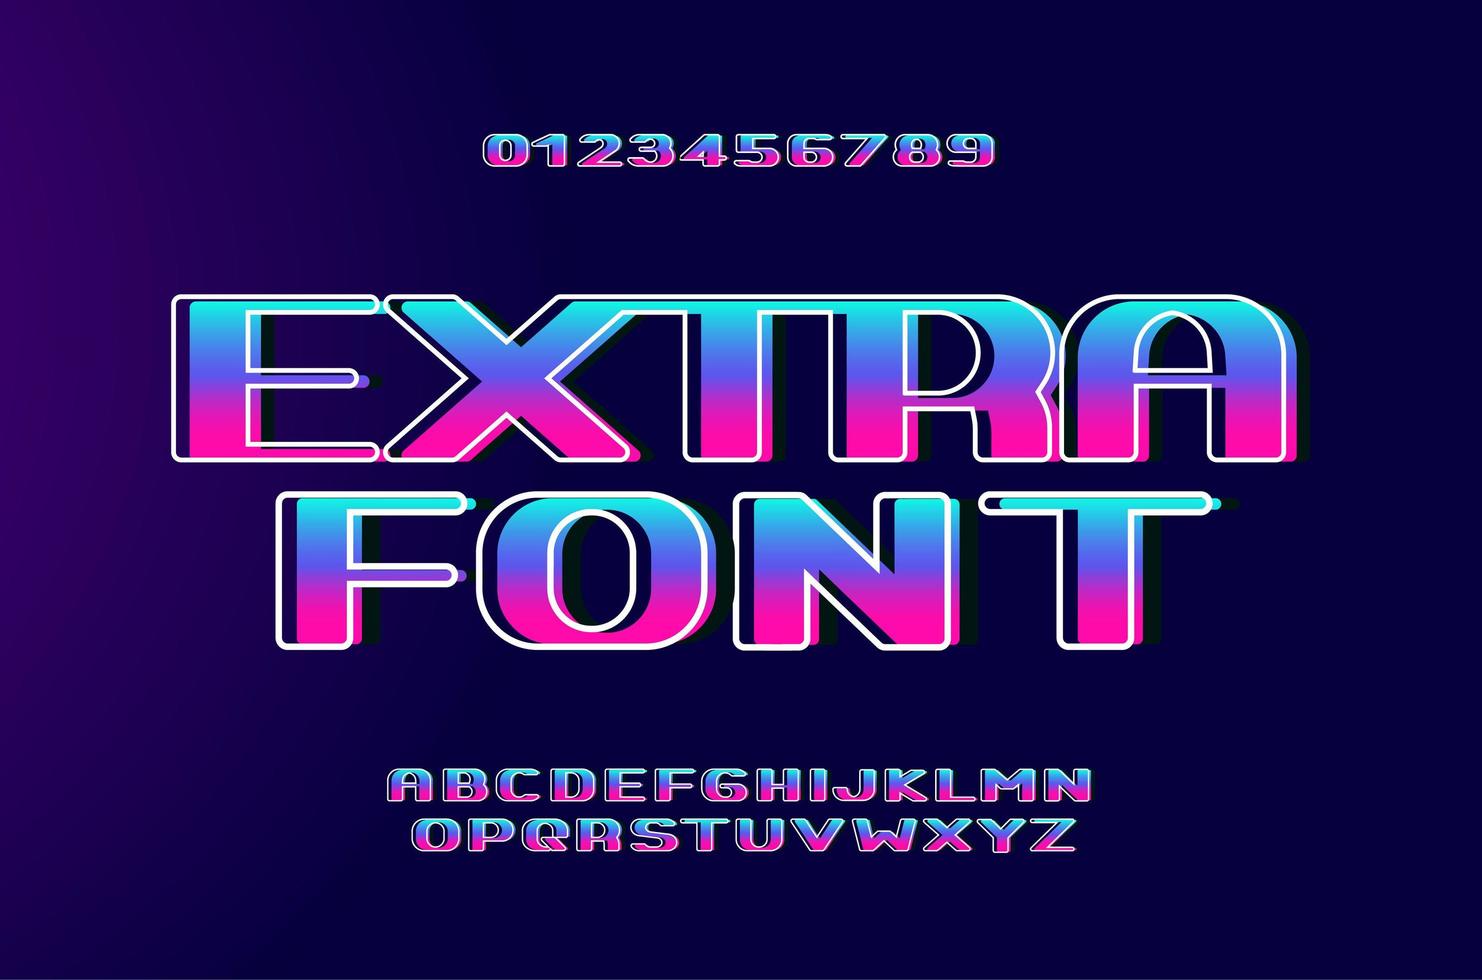 Retro wave bold font with holographic glow effect vector